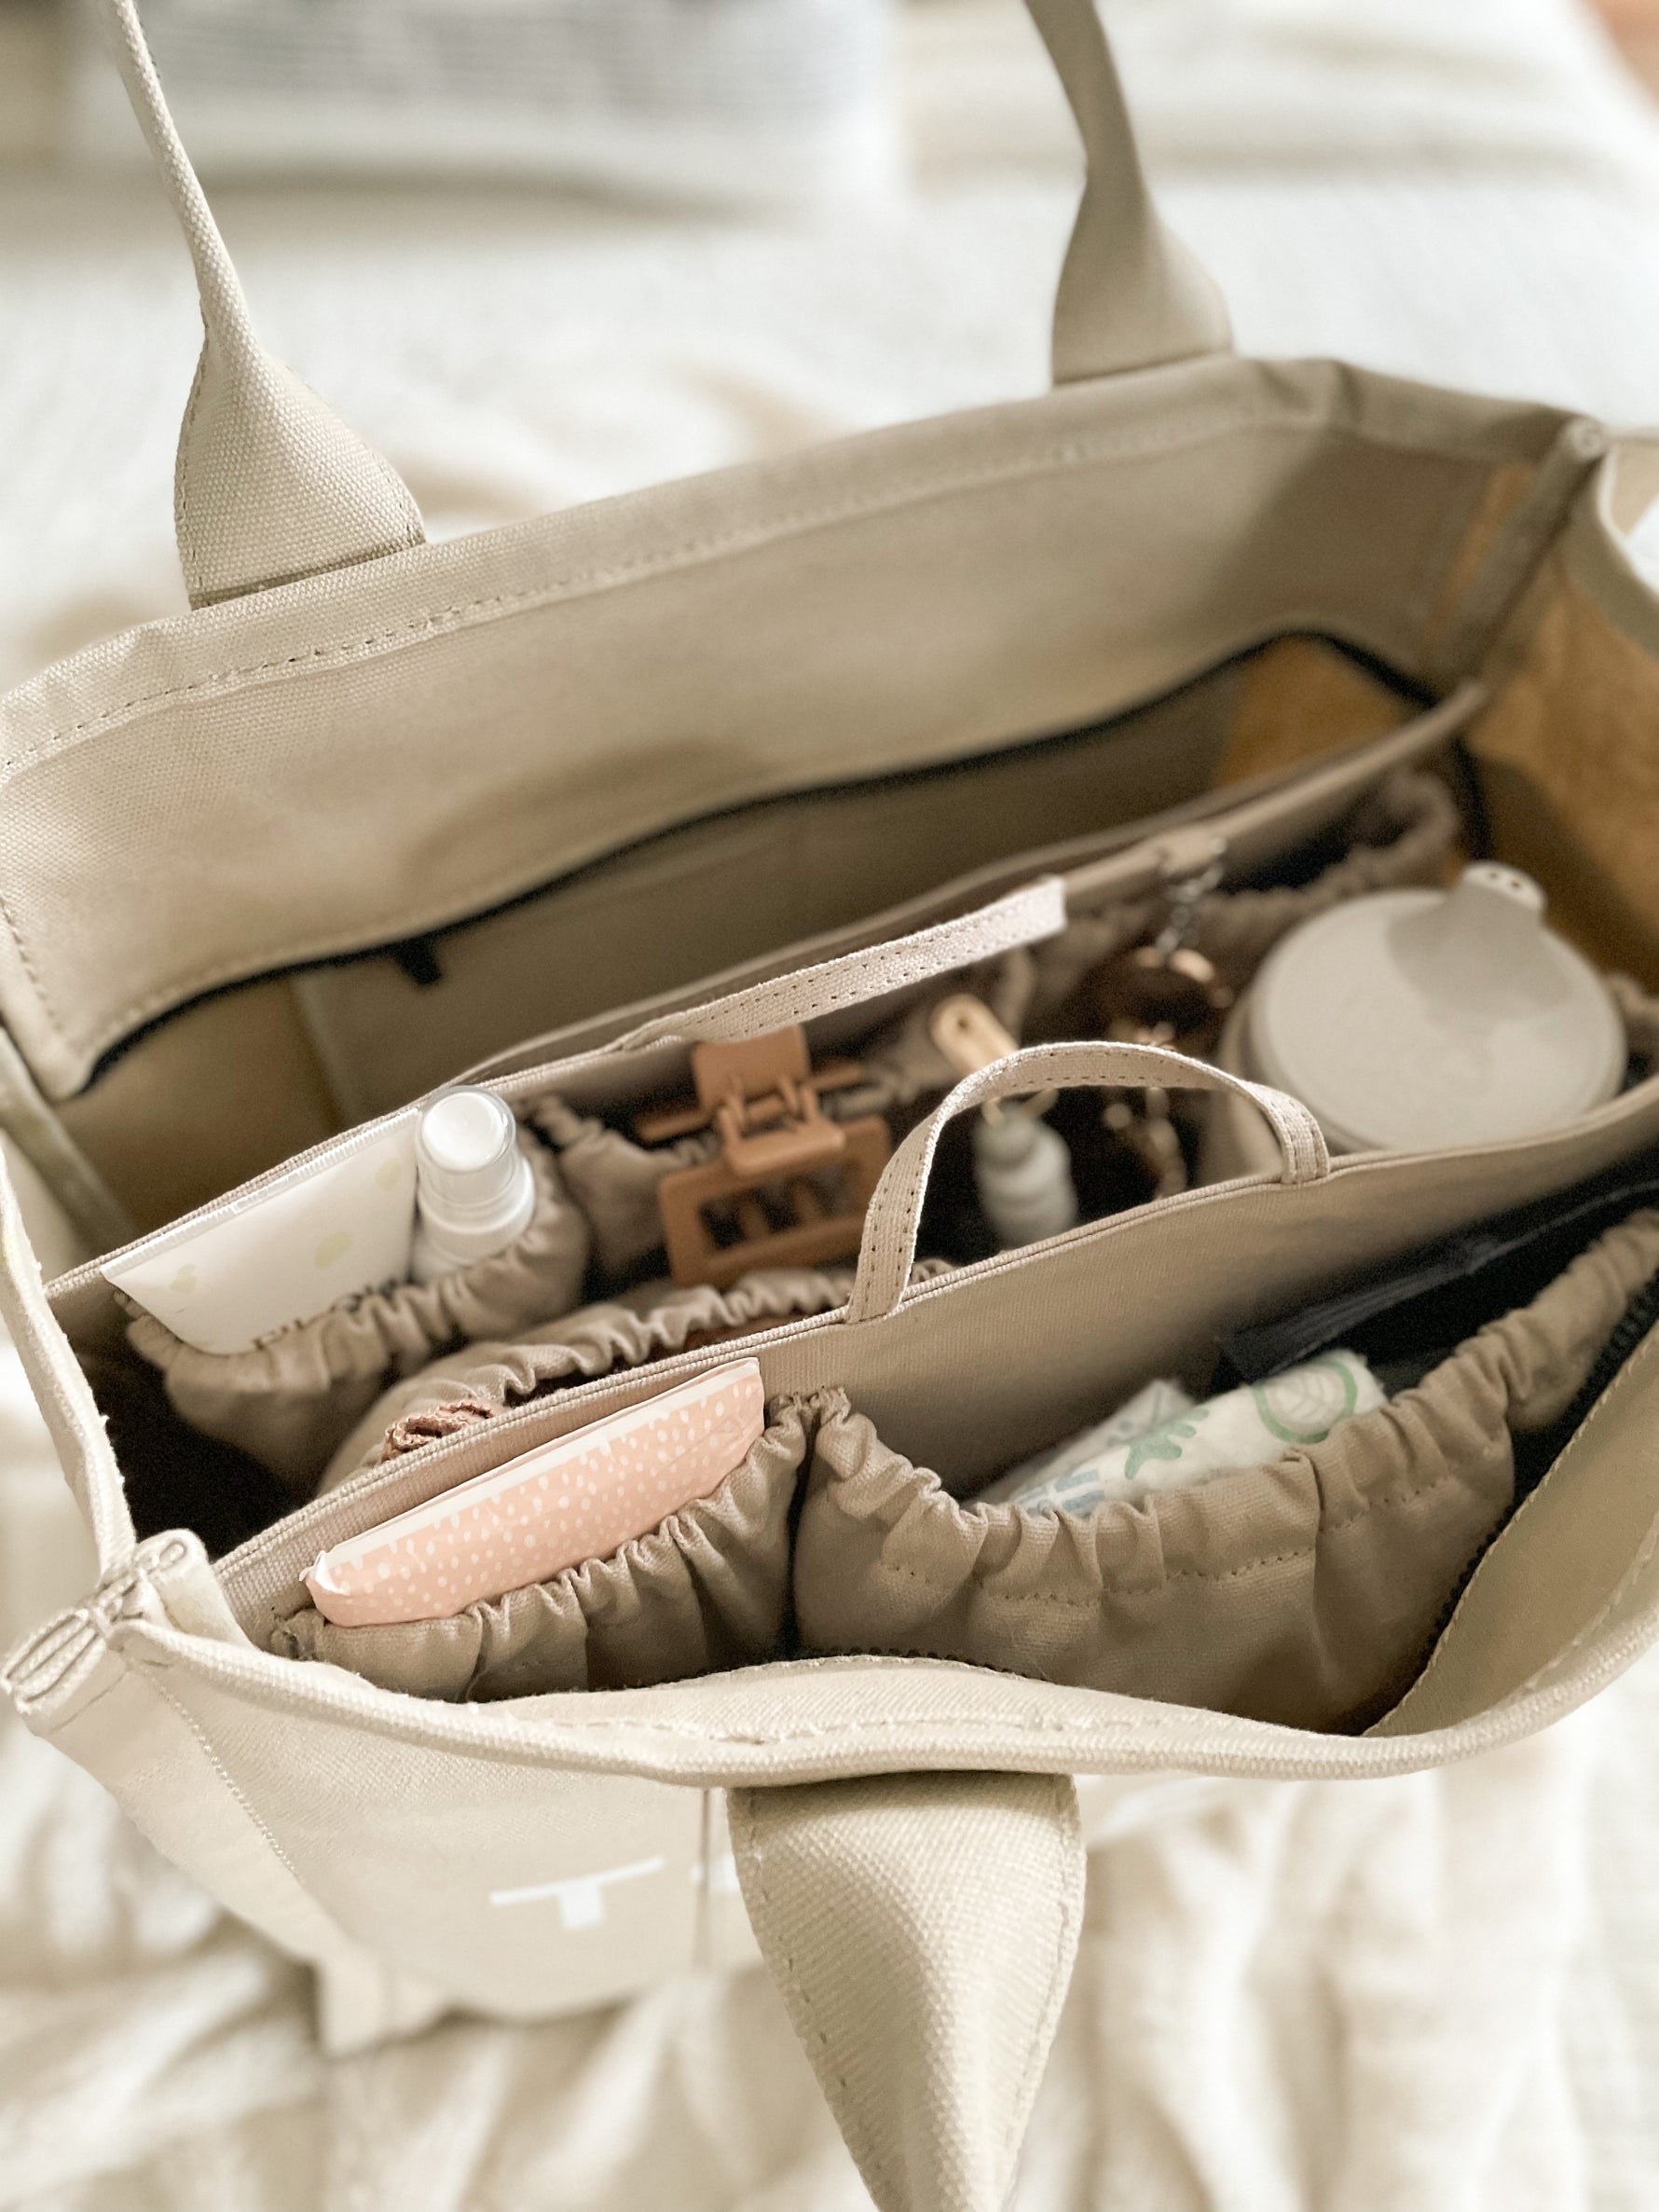 Why Your Bag Needs an Organizer